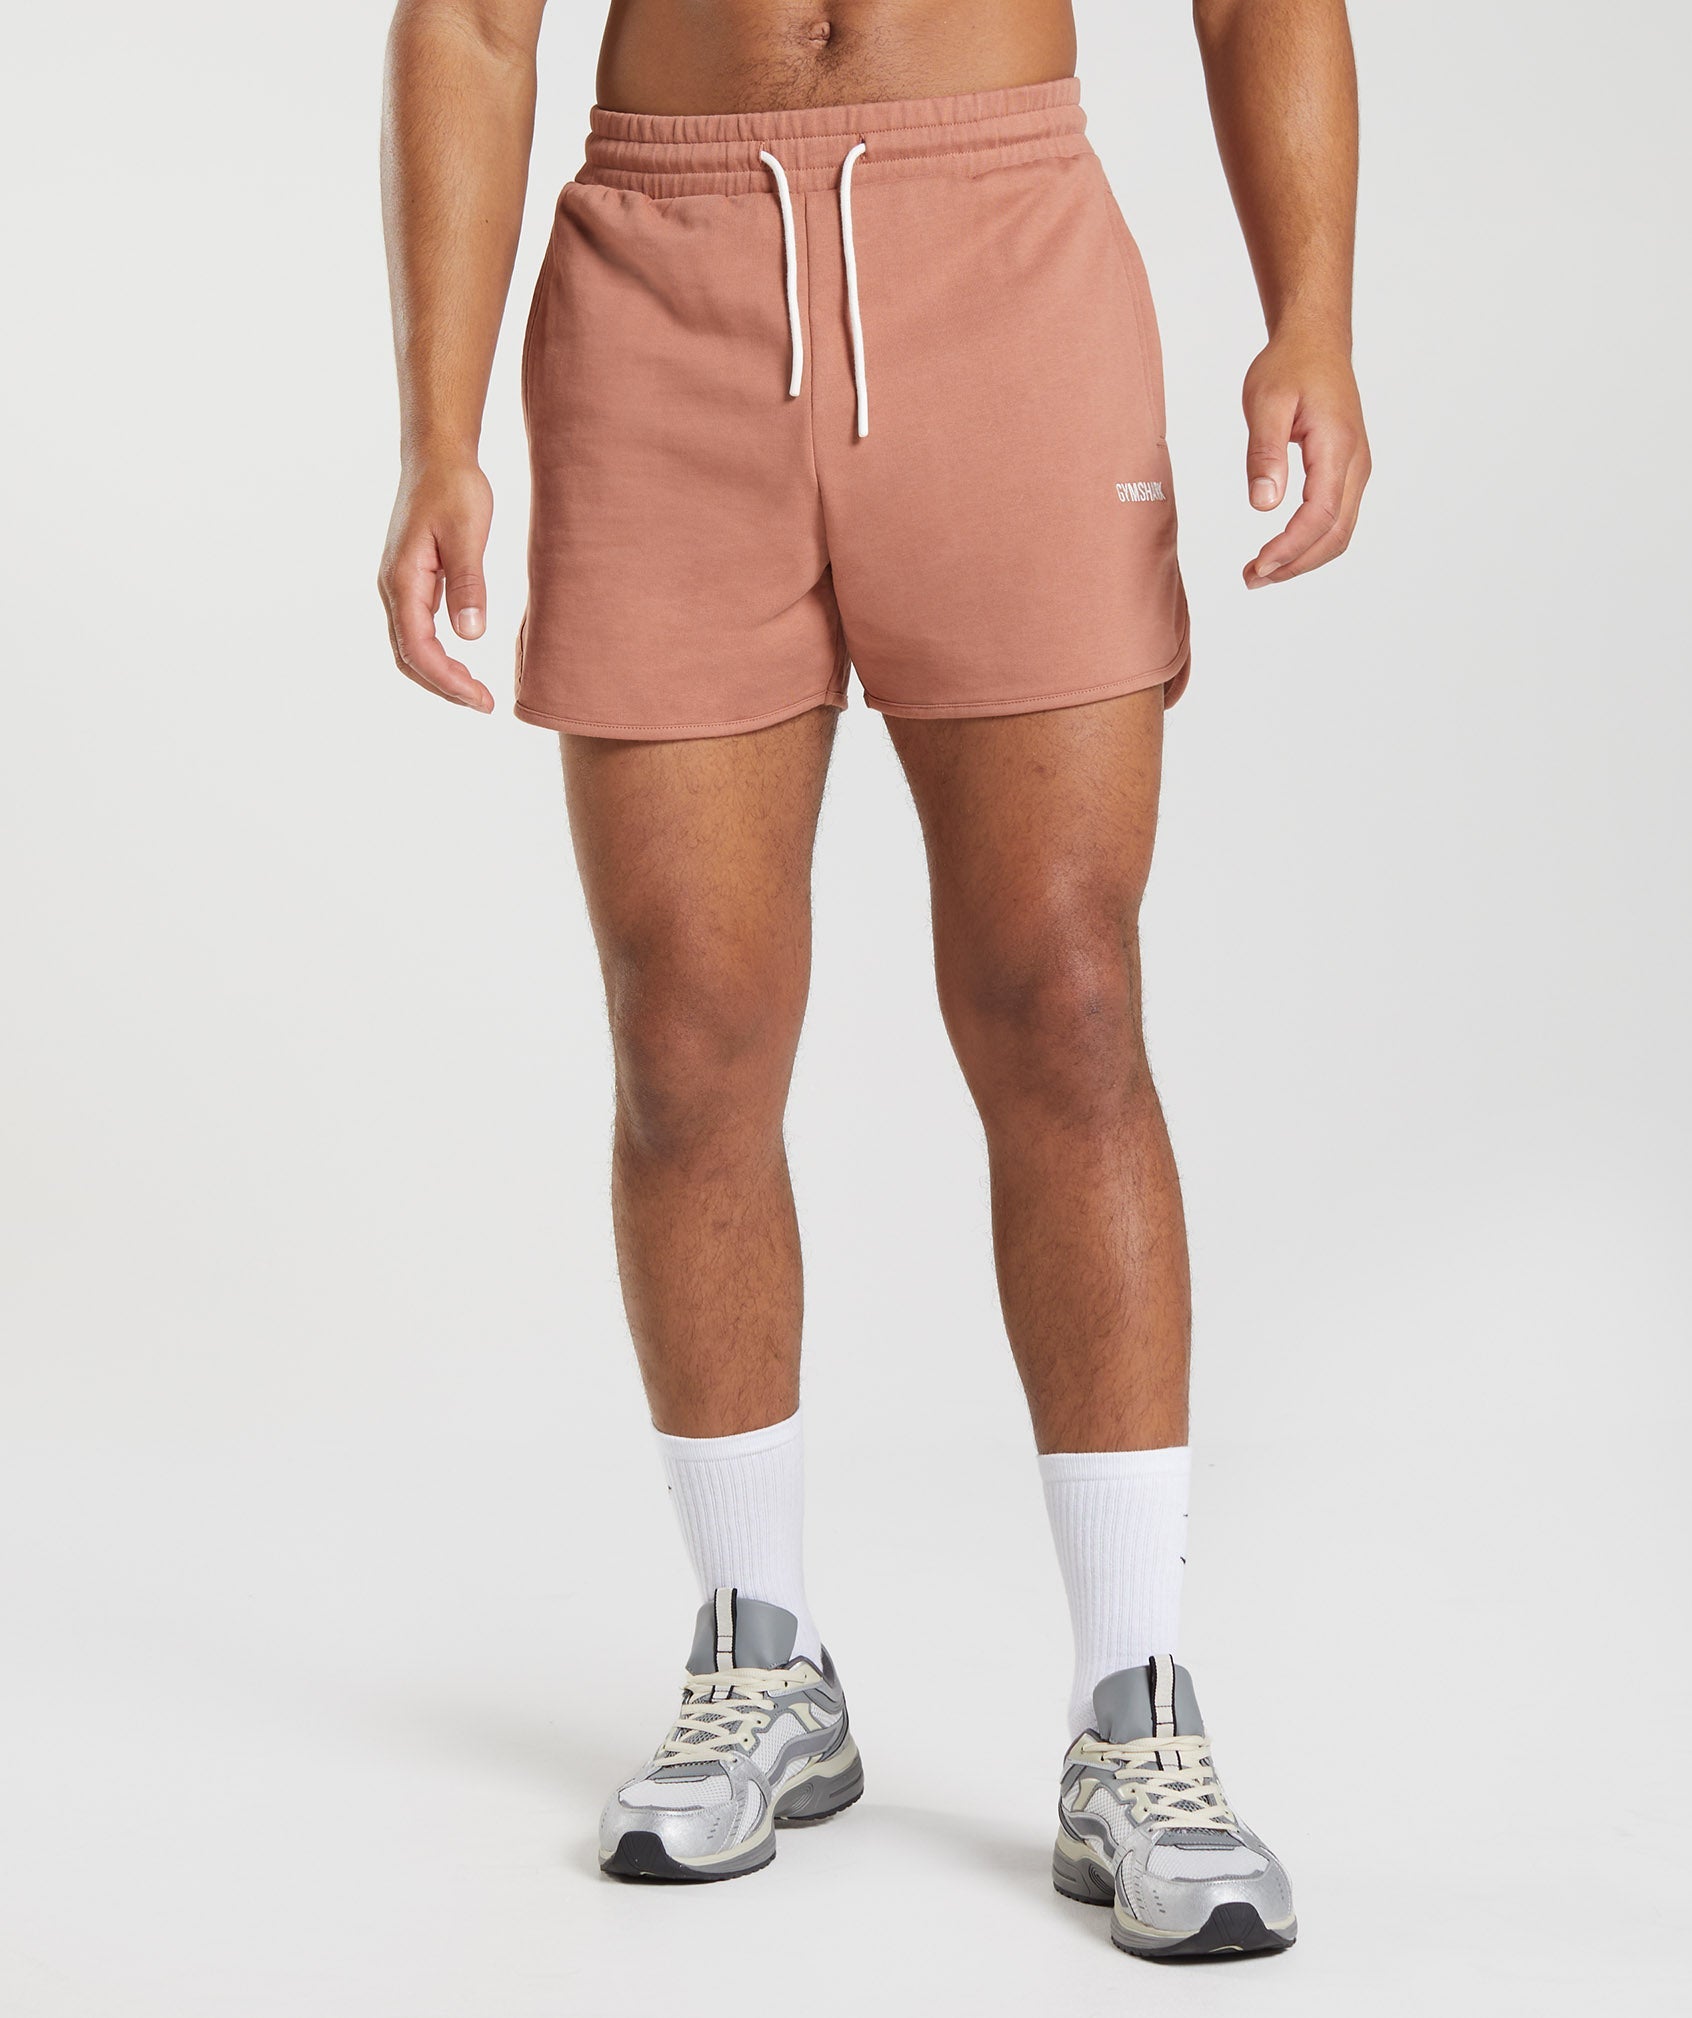 Rest Day Sweats 4'' Lounge Shorts in Toffee Brown - view 1